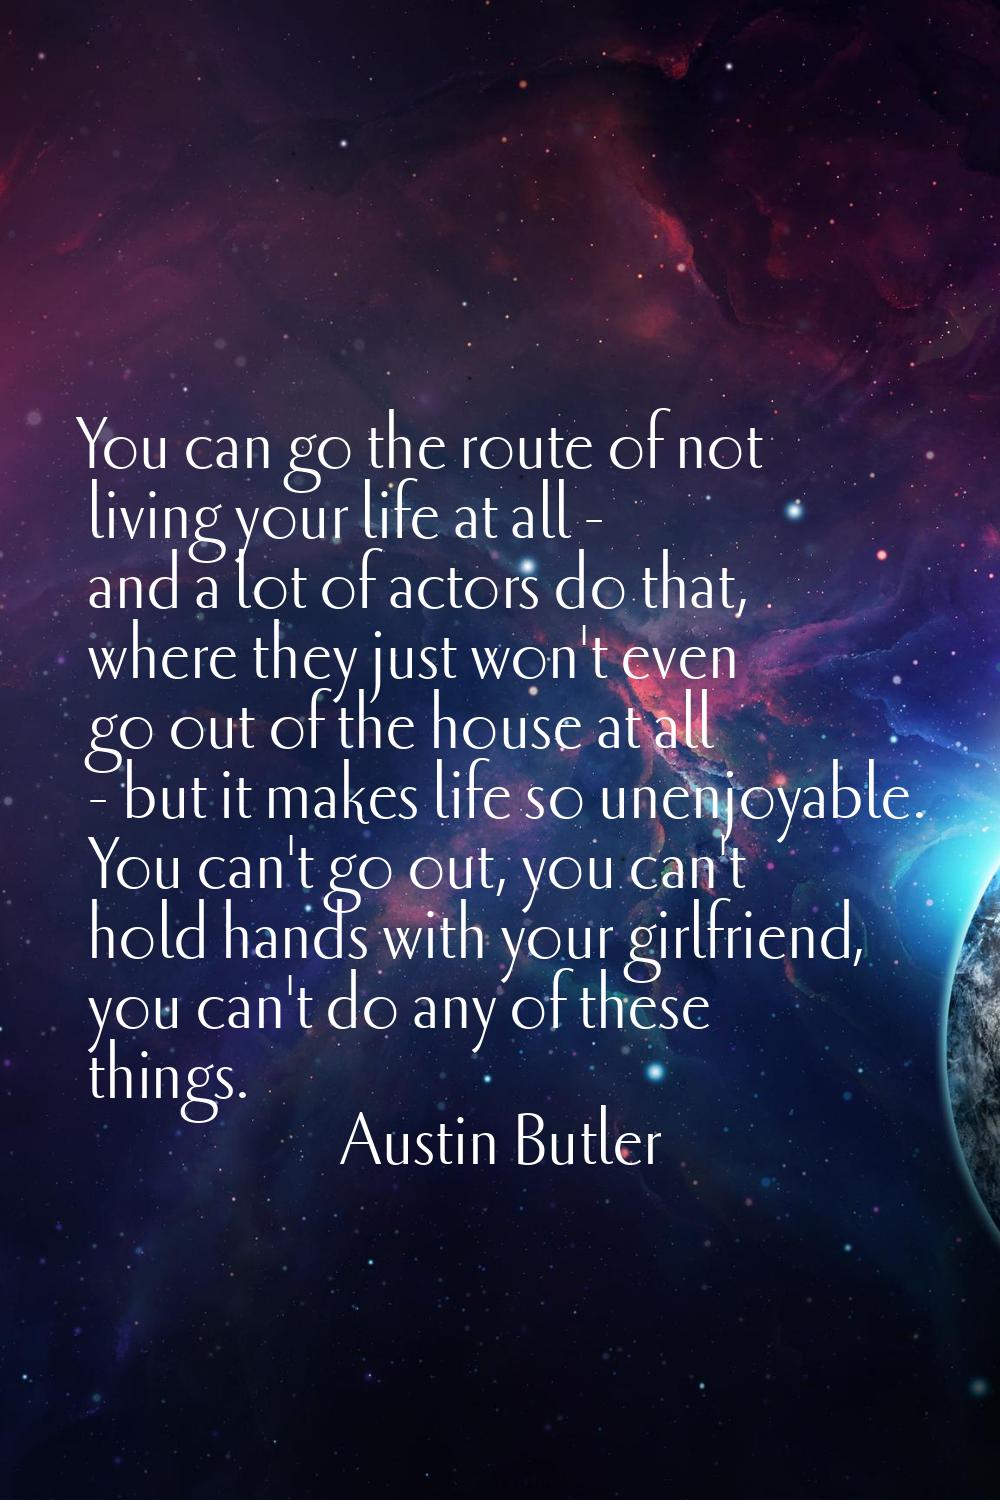 You can go the route of not living your life at all - and a lot of actors do that, where they just 